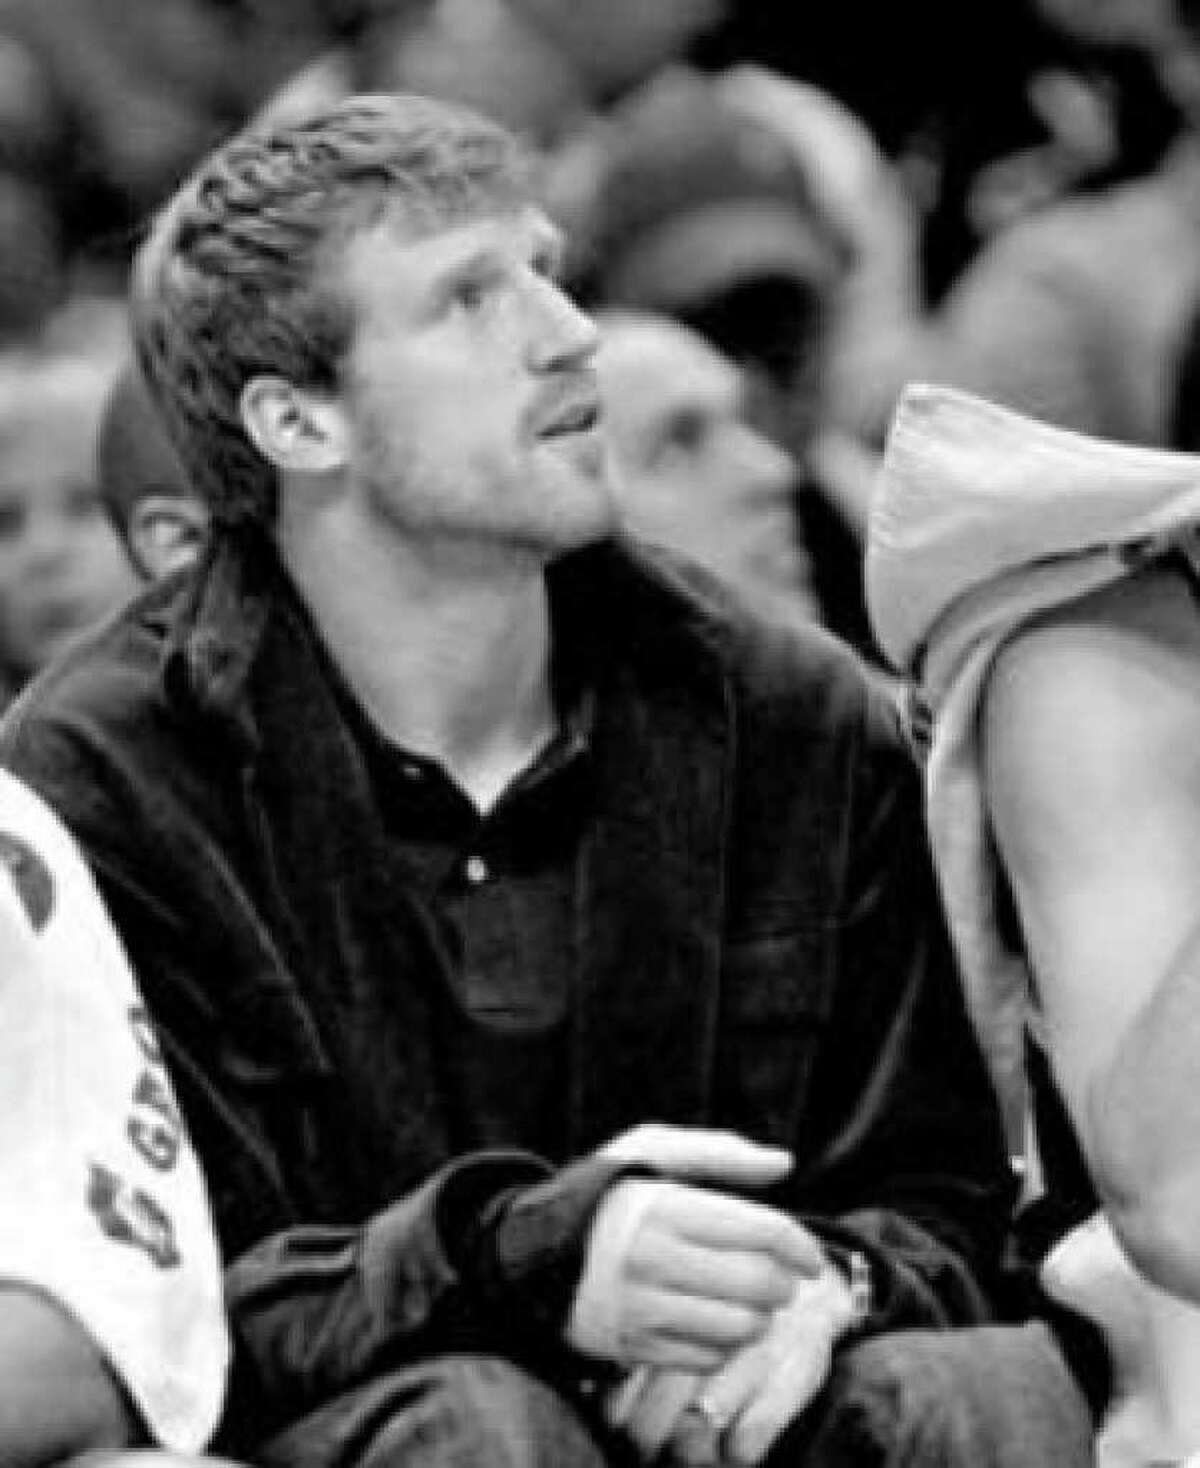 The Spurs' Matt Bonner sits on the bench after breaking a bone in his right hand in Saturday's game against the Pacers.